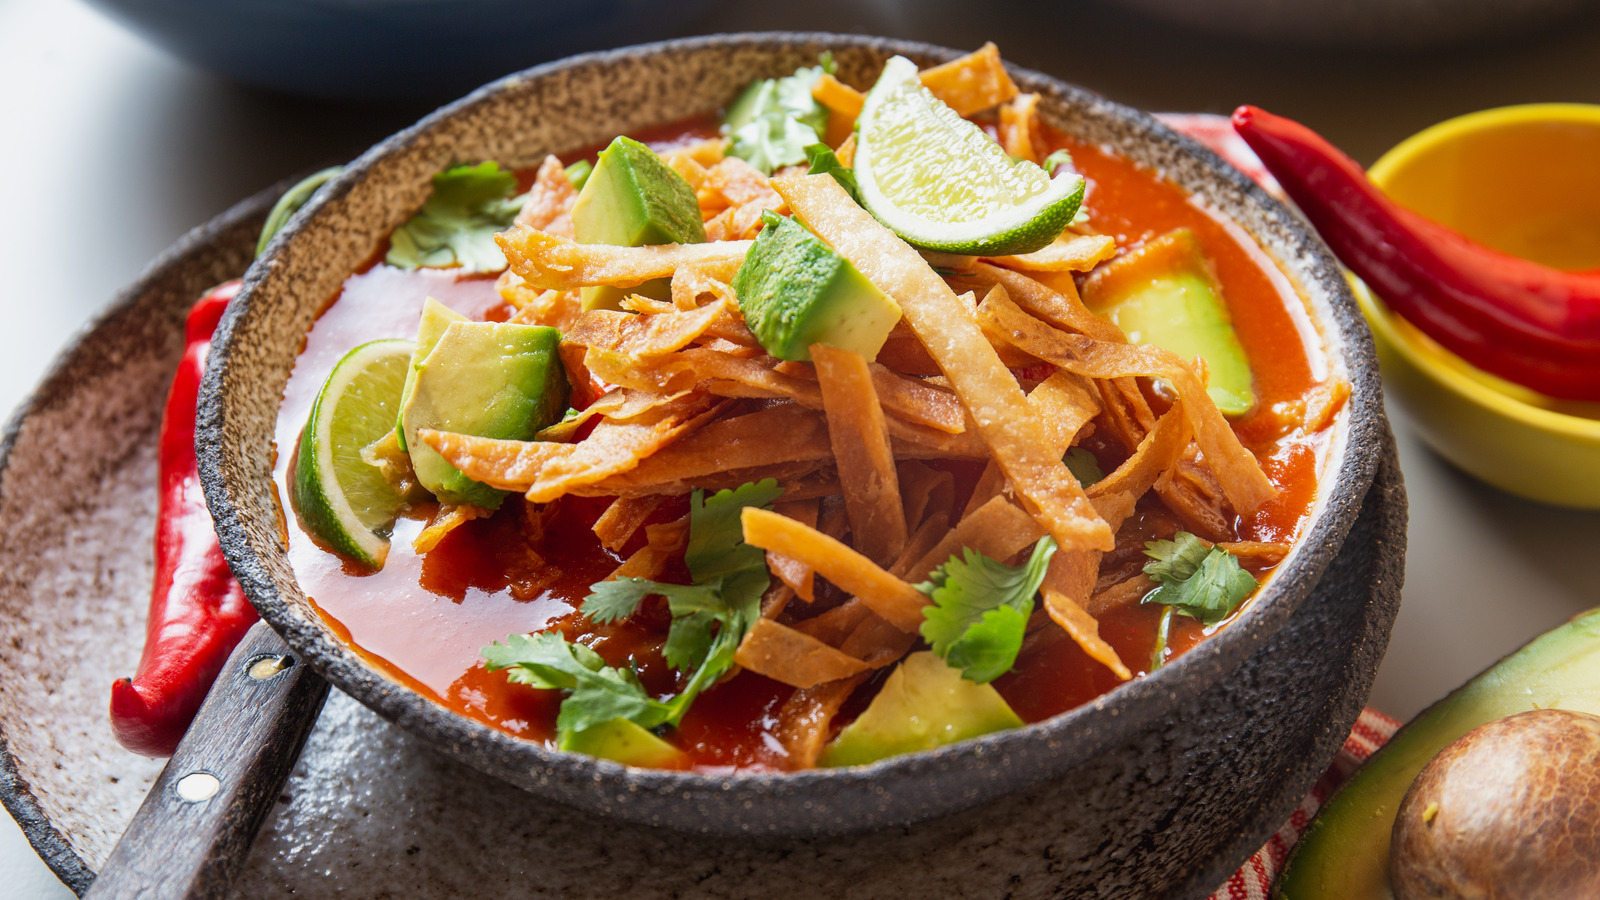 The Tortilla Soup Ingredient That Should Be Kept Raw